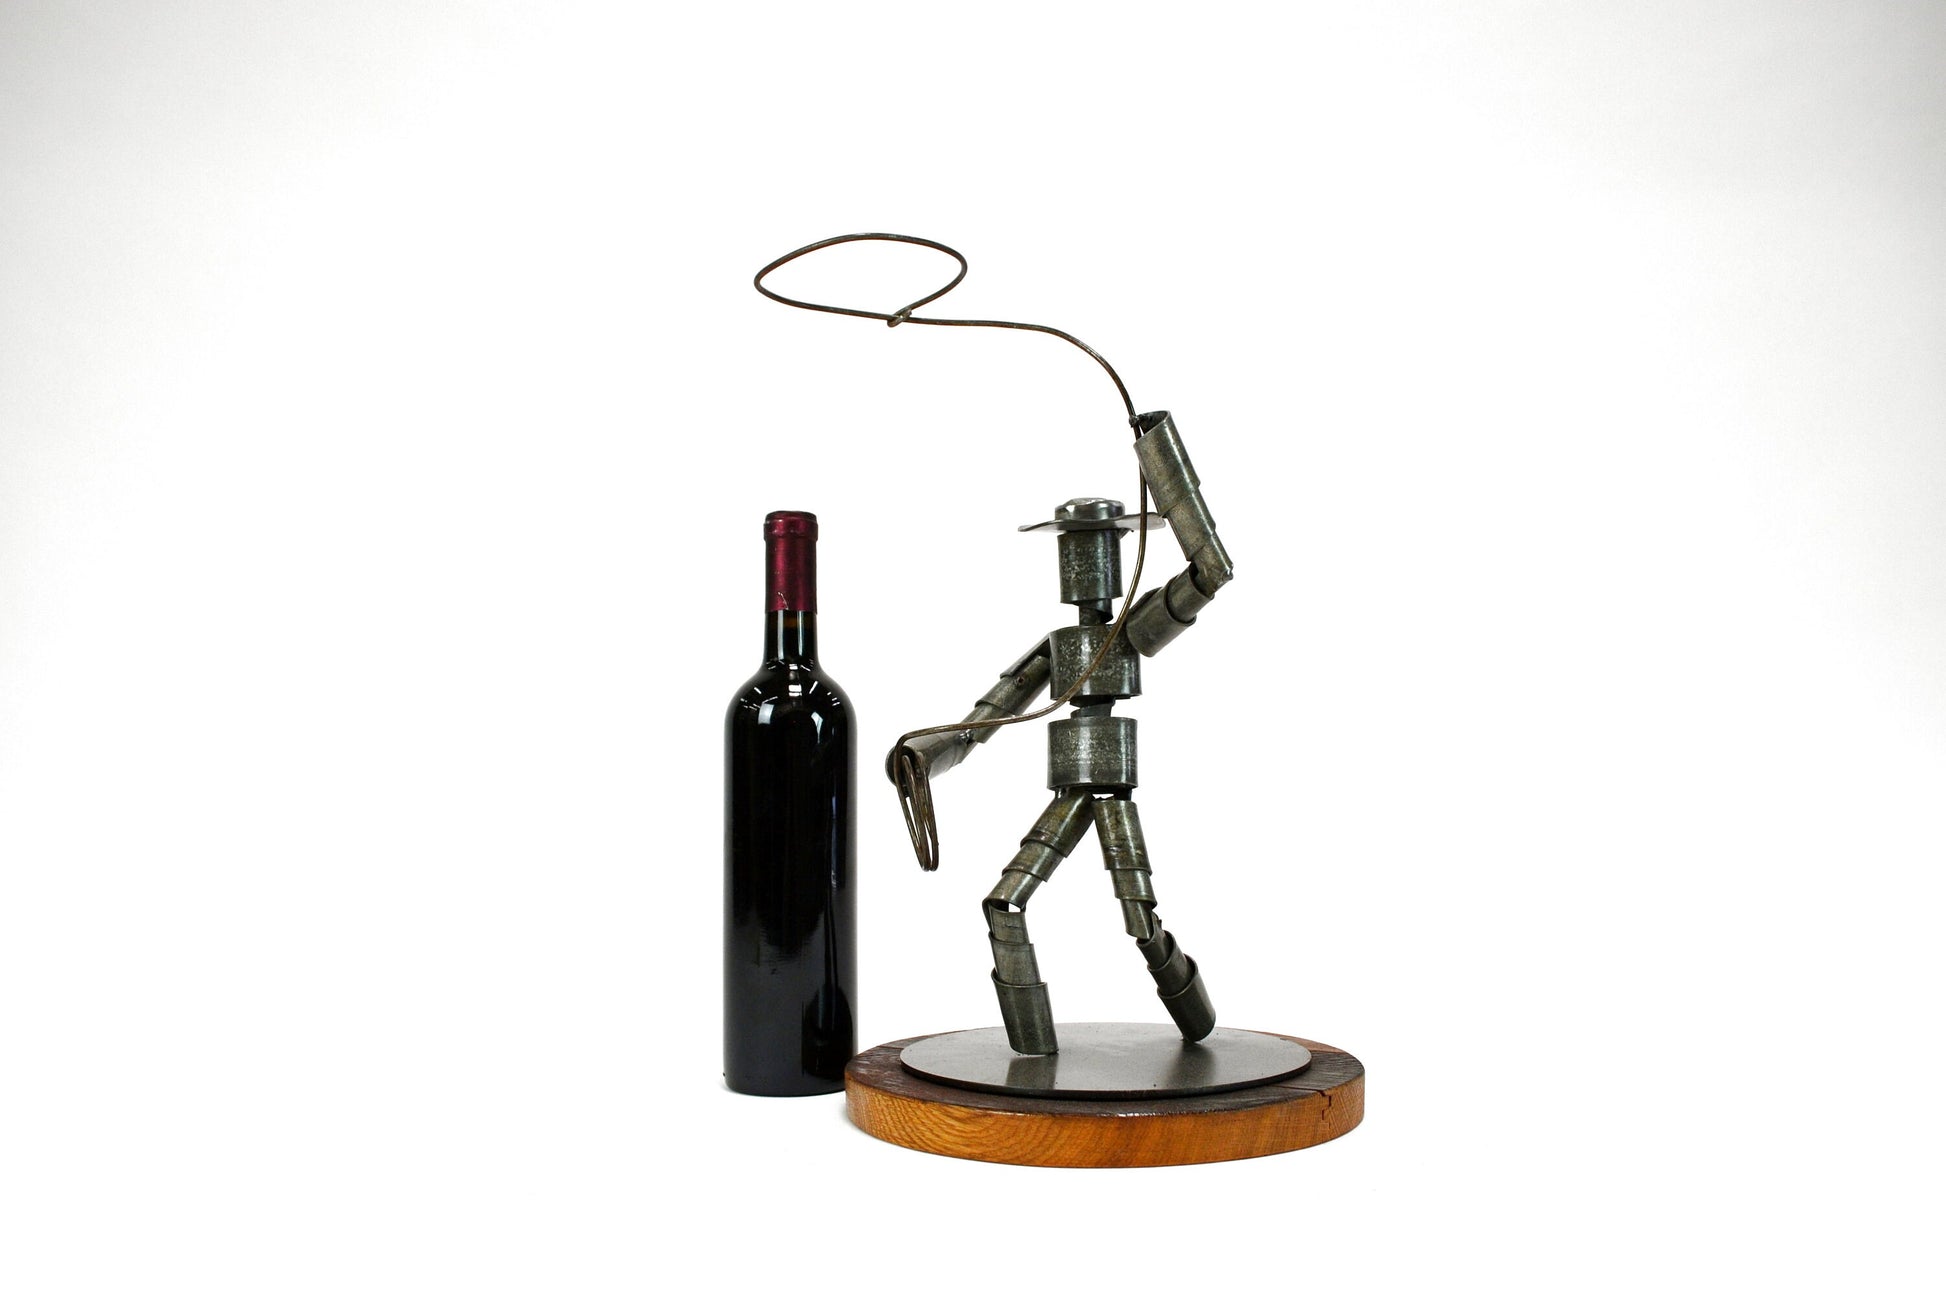 Cowboy Lasso Made From Retired Napa Wine Barrel Rings - Limited Edition - Signed + Numbered - 100% Recycled!